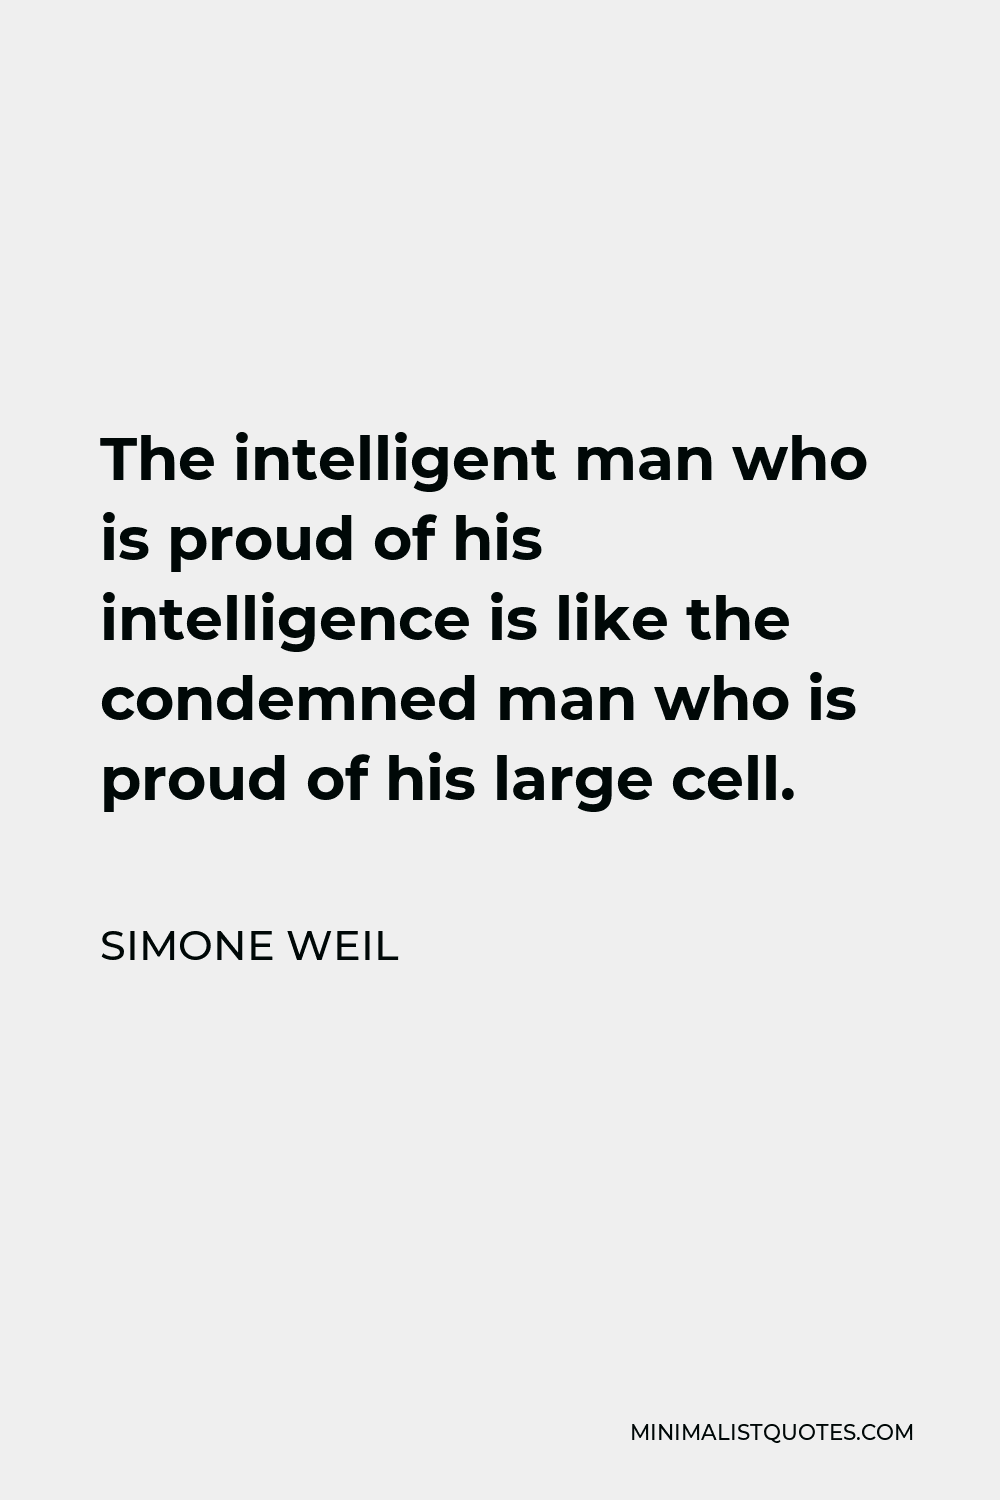 Simone Weil Quote - The intelligent man who is proud of his intelligence is like the condemned man who is proud of his large cell.